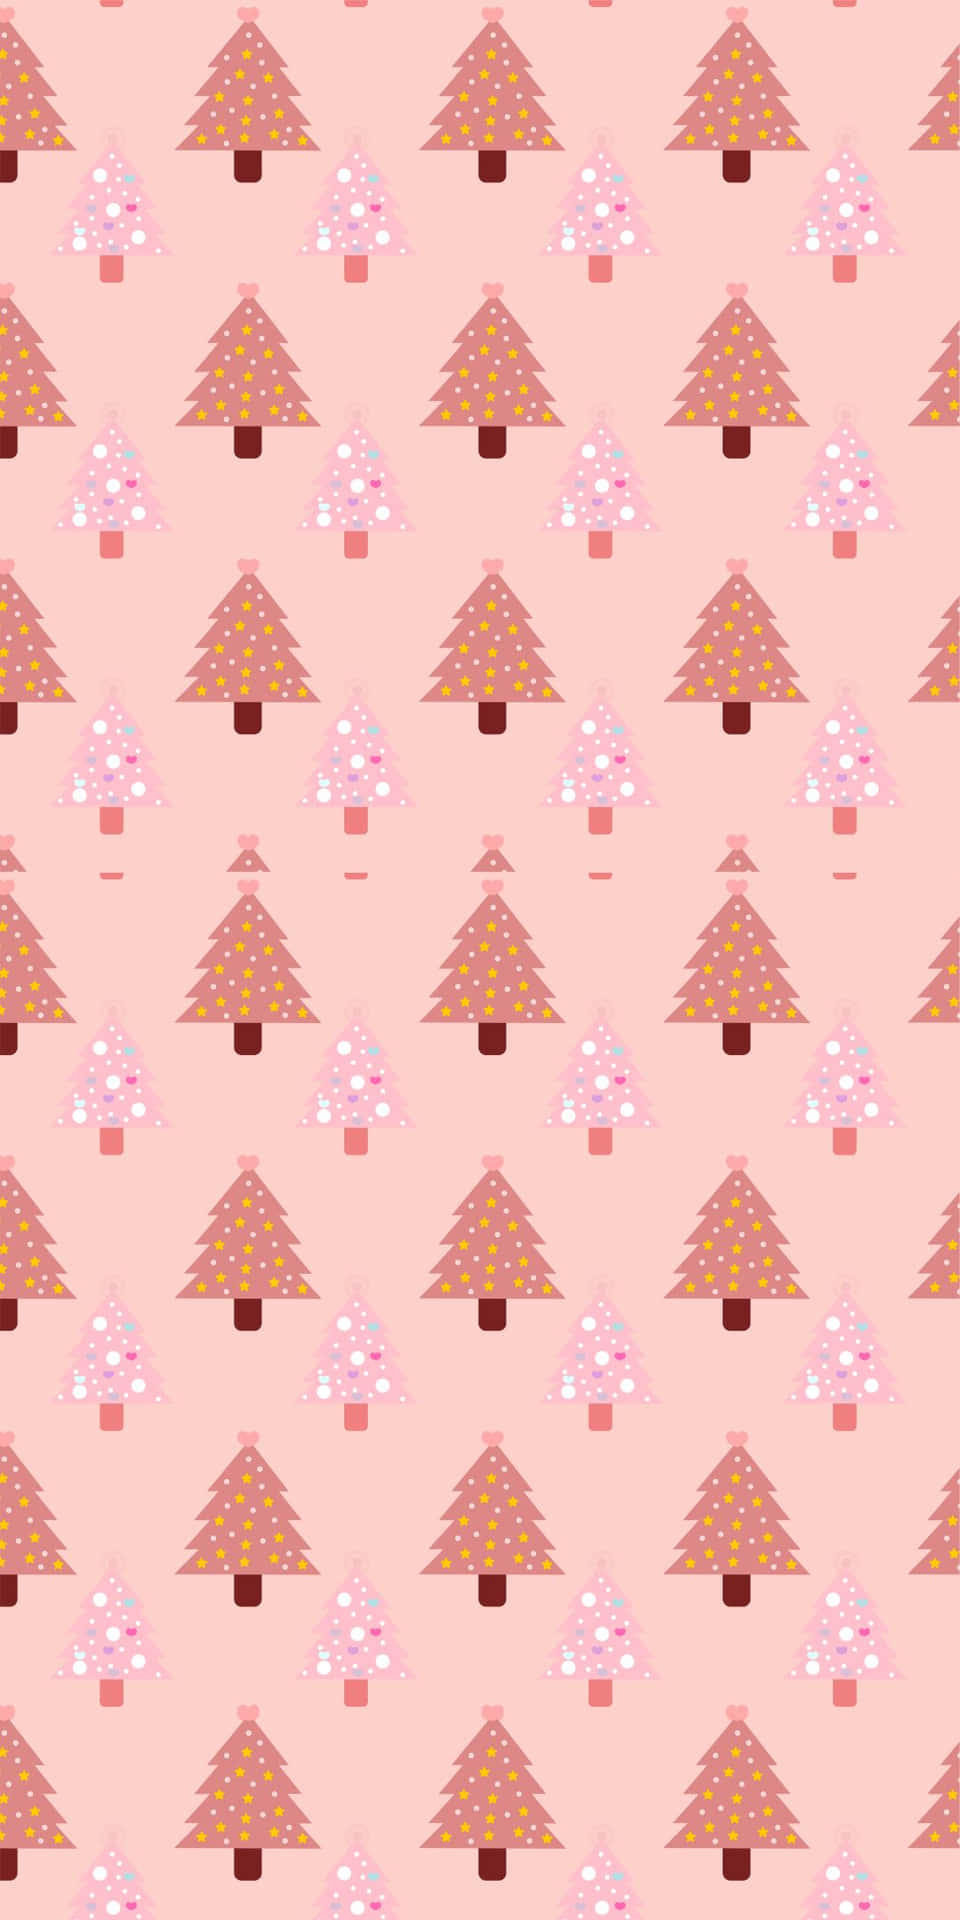 Download A Pink Christmas Tree Pattern With Pink Trees | Wallpapers.com